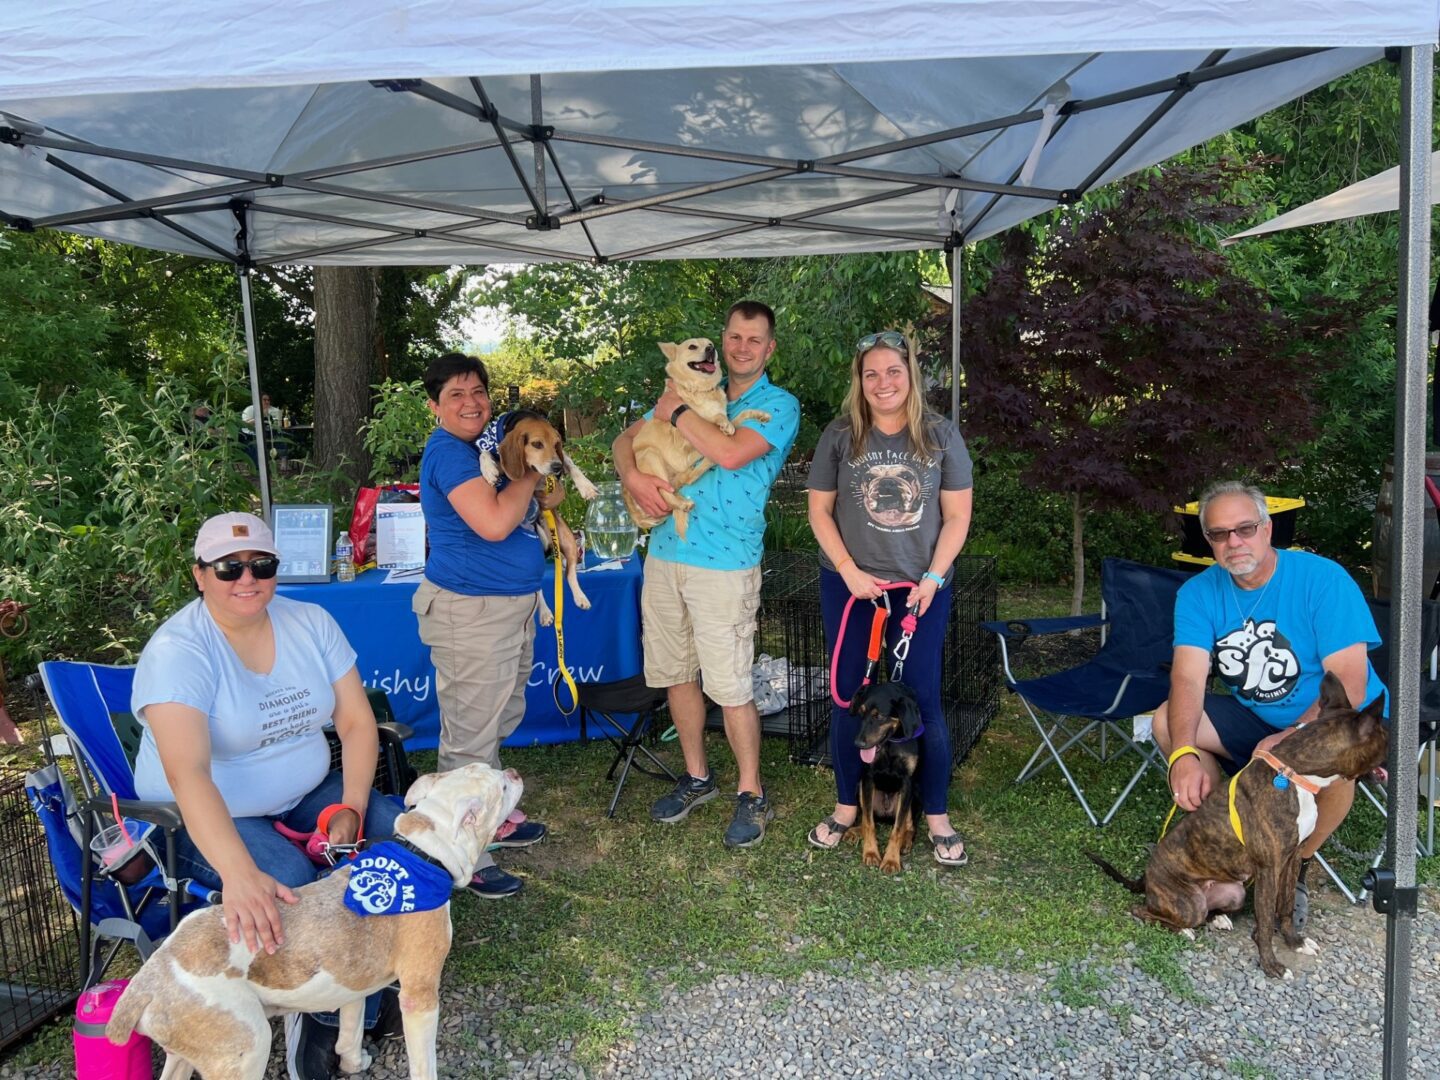 A group of people posing with their dogs under a tent.